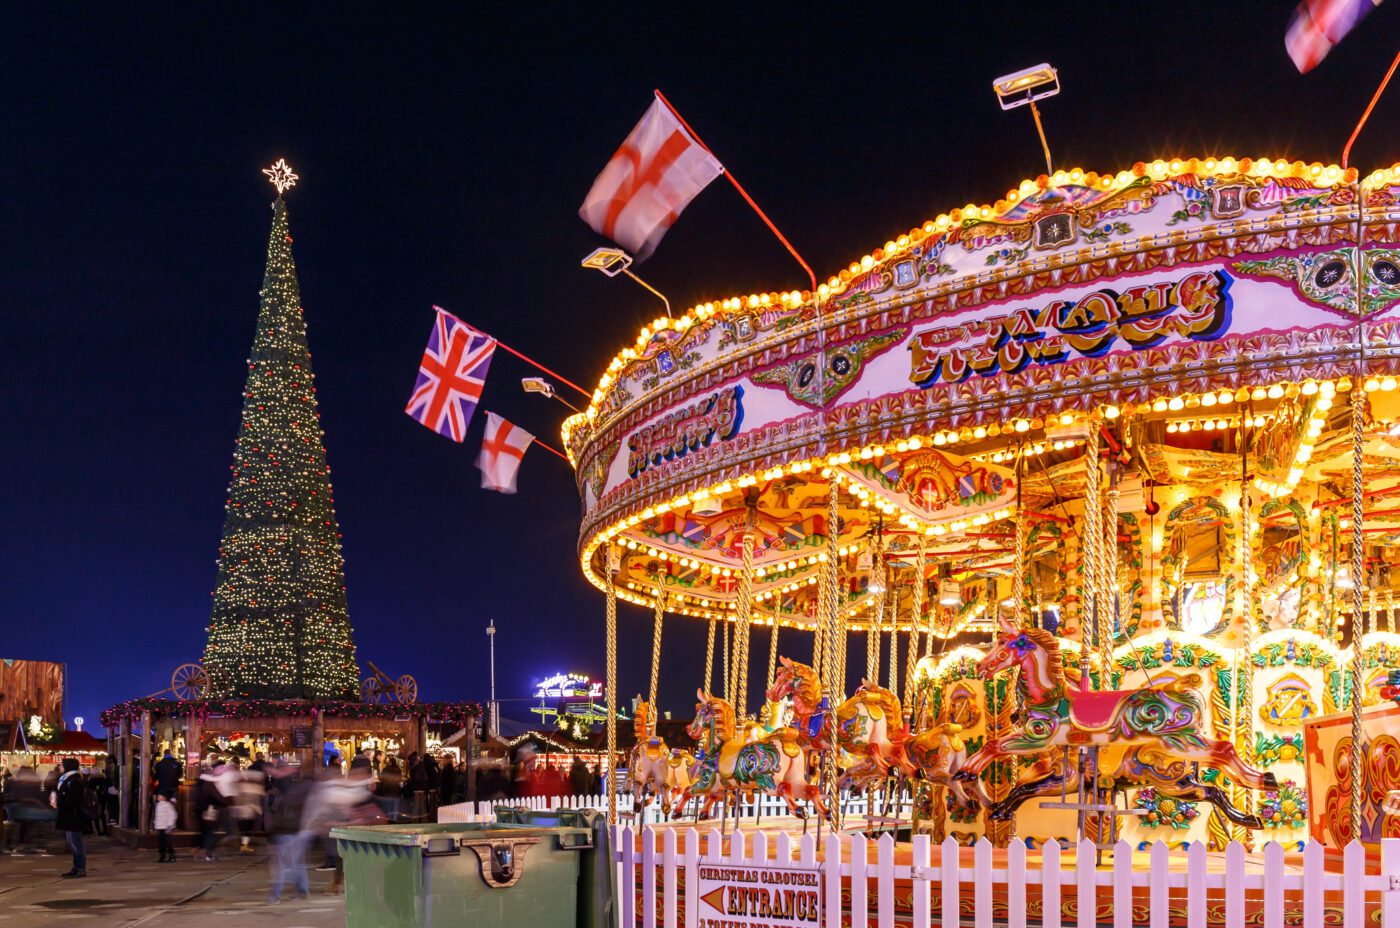 A carousel lit up for the evening, in front of a 40 Foot Christmas Tree at Hyde Park Winter Wonderland,